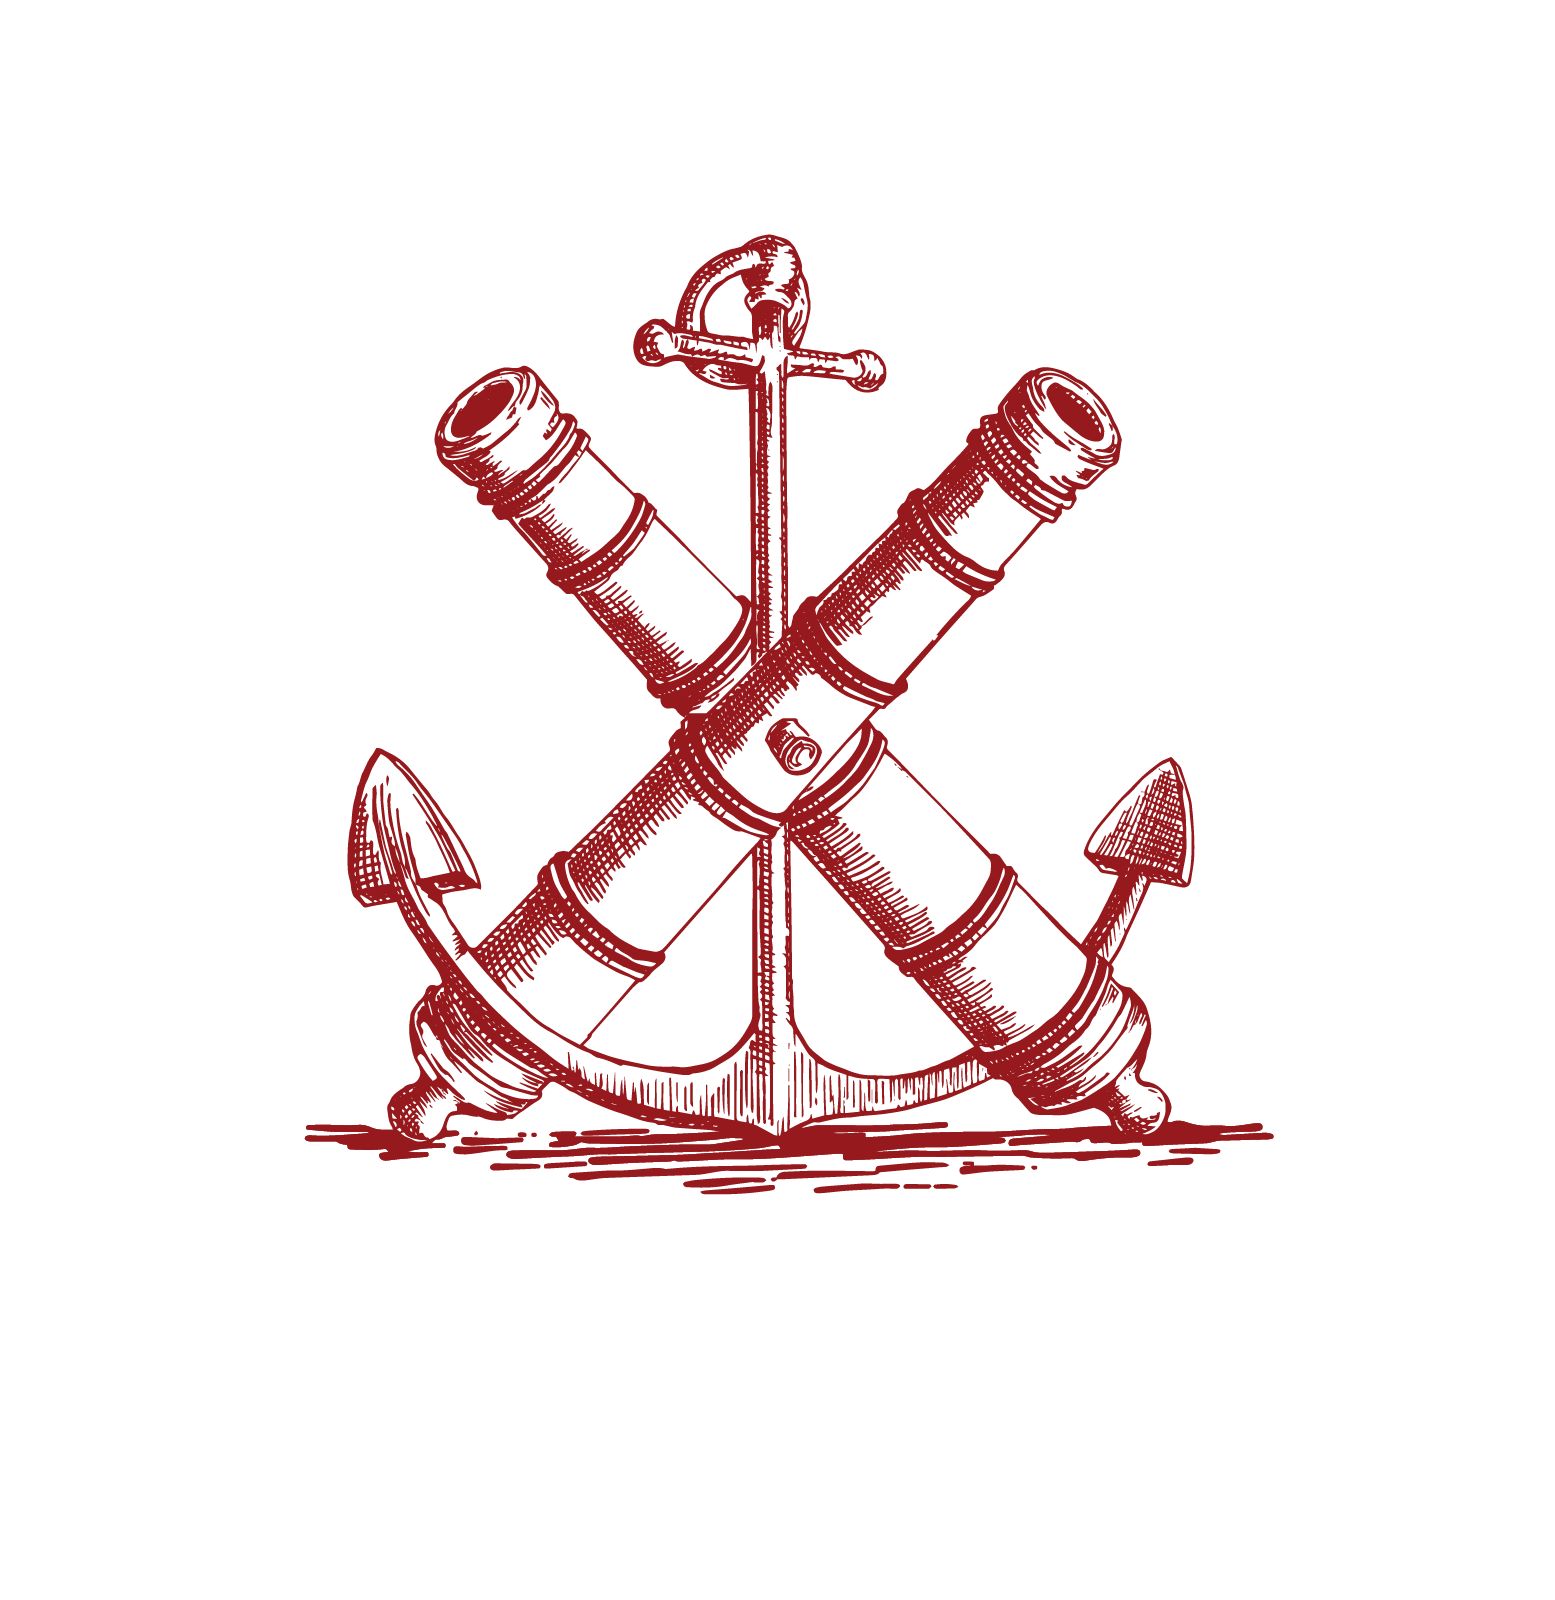 Marblehead Brewing Co.